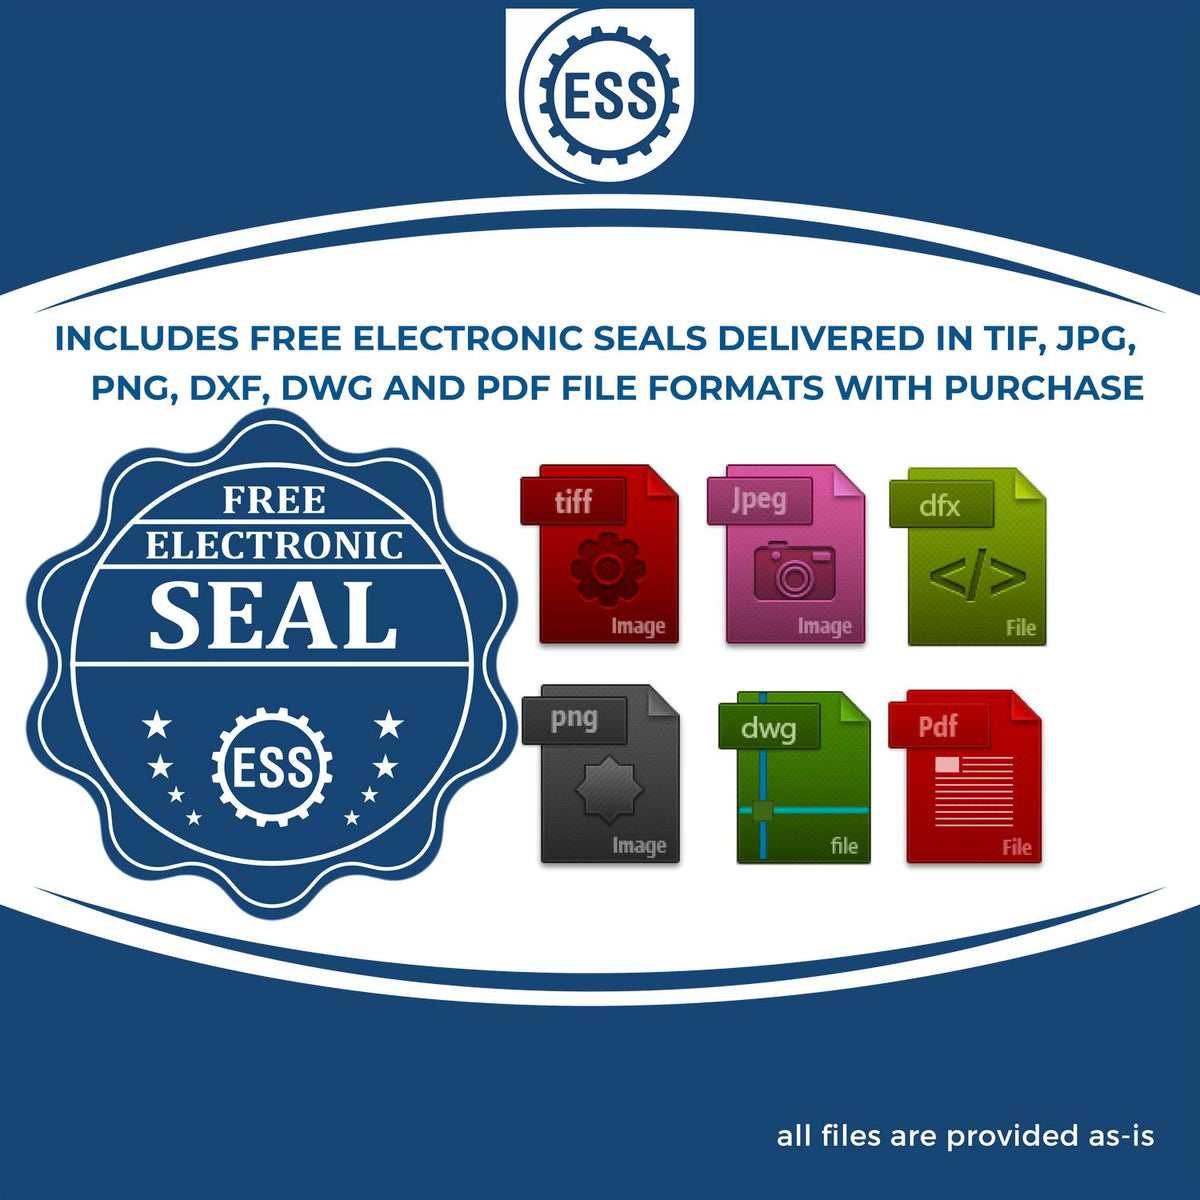 An infographic for the free electronic seal for the Minnesota Professional Geologist Seal Stamp illustrating the different file type icons such as DXF, DWG, TIF, JPG and PNG.